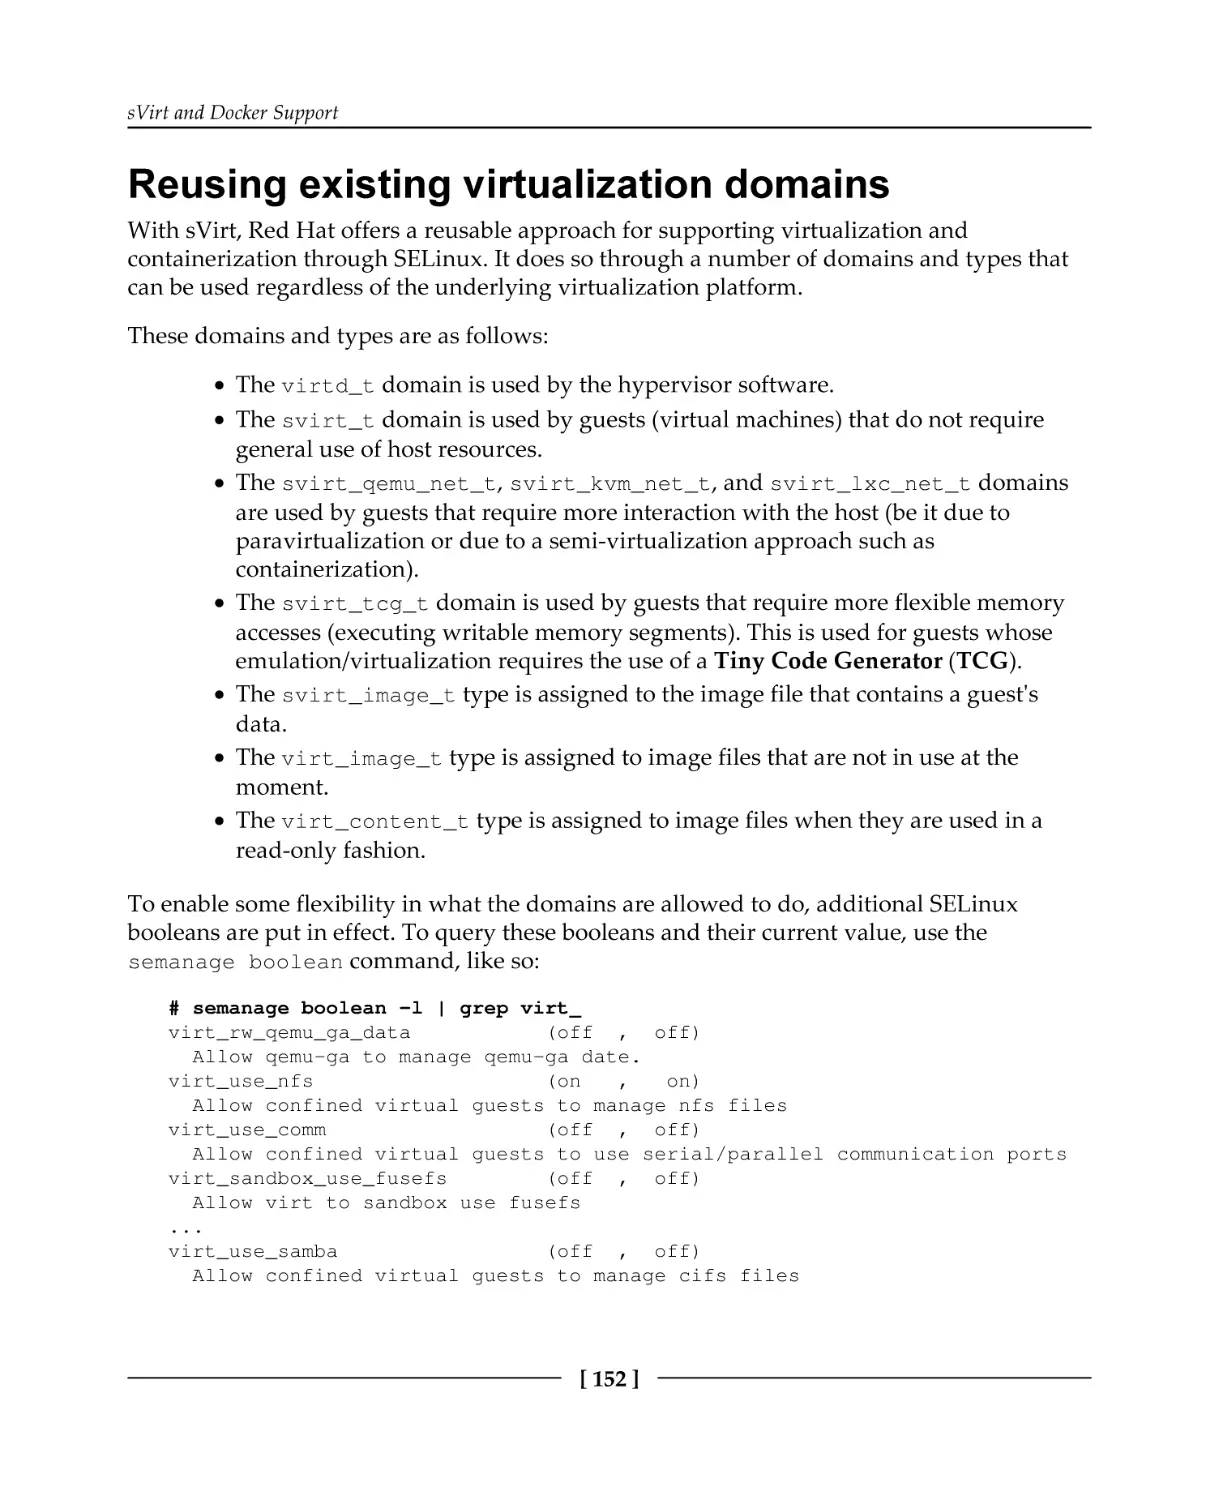 Reusing existing virtualization domains